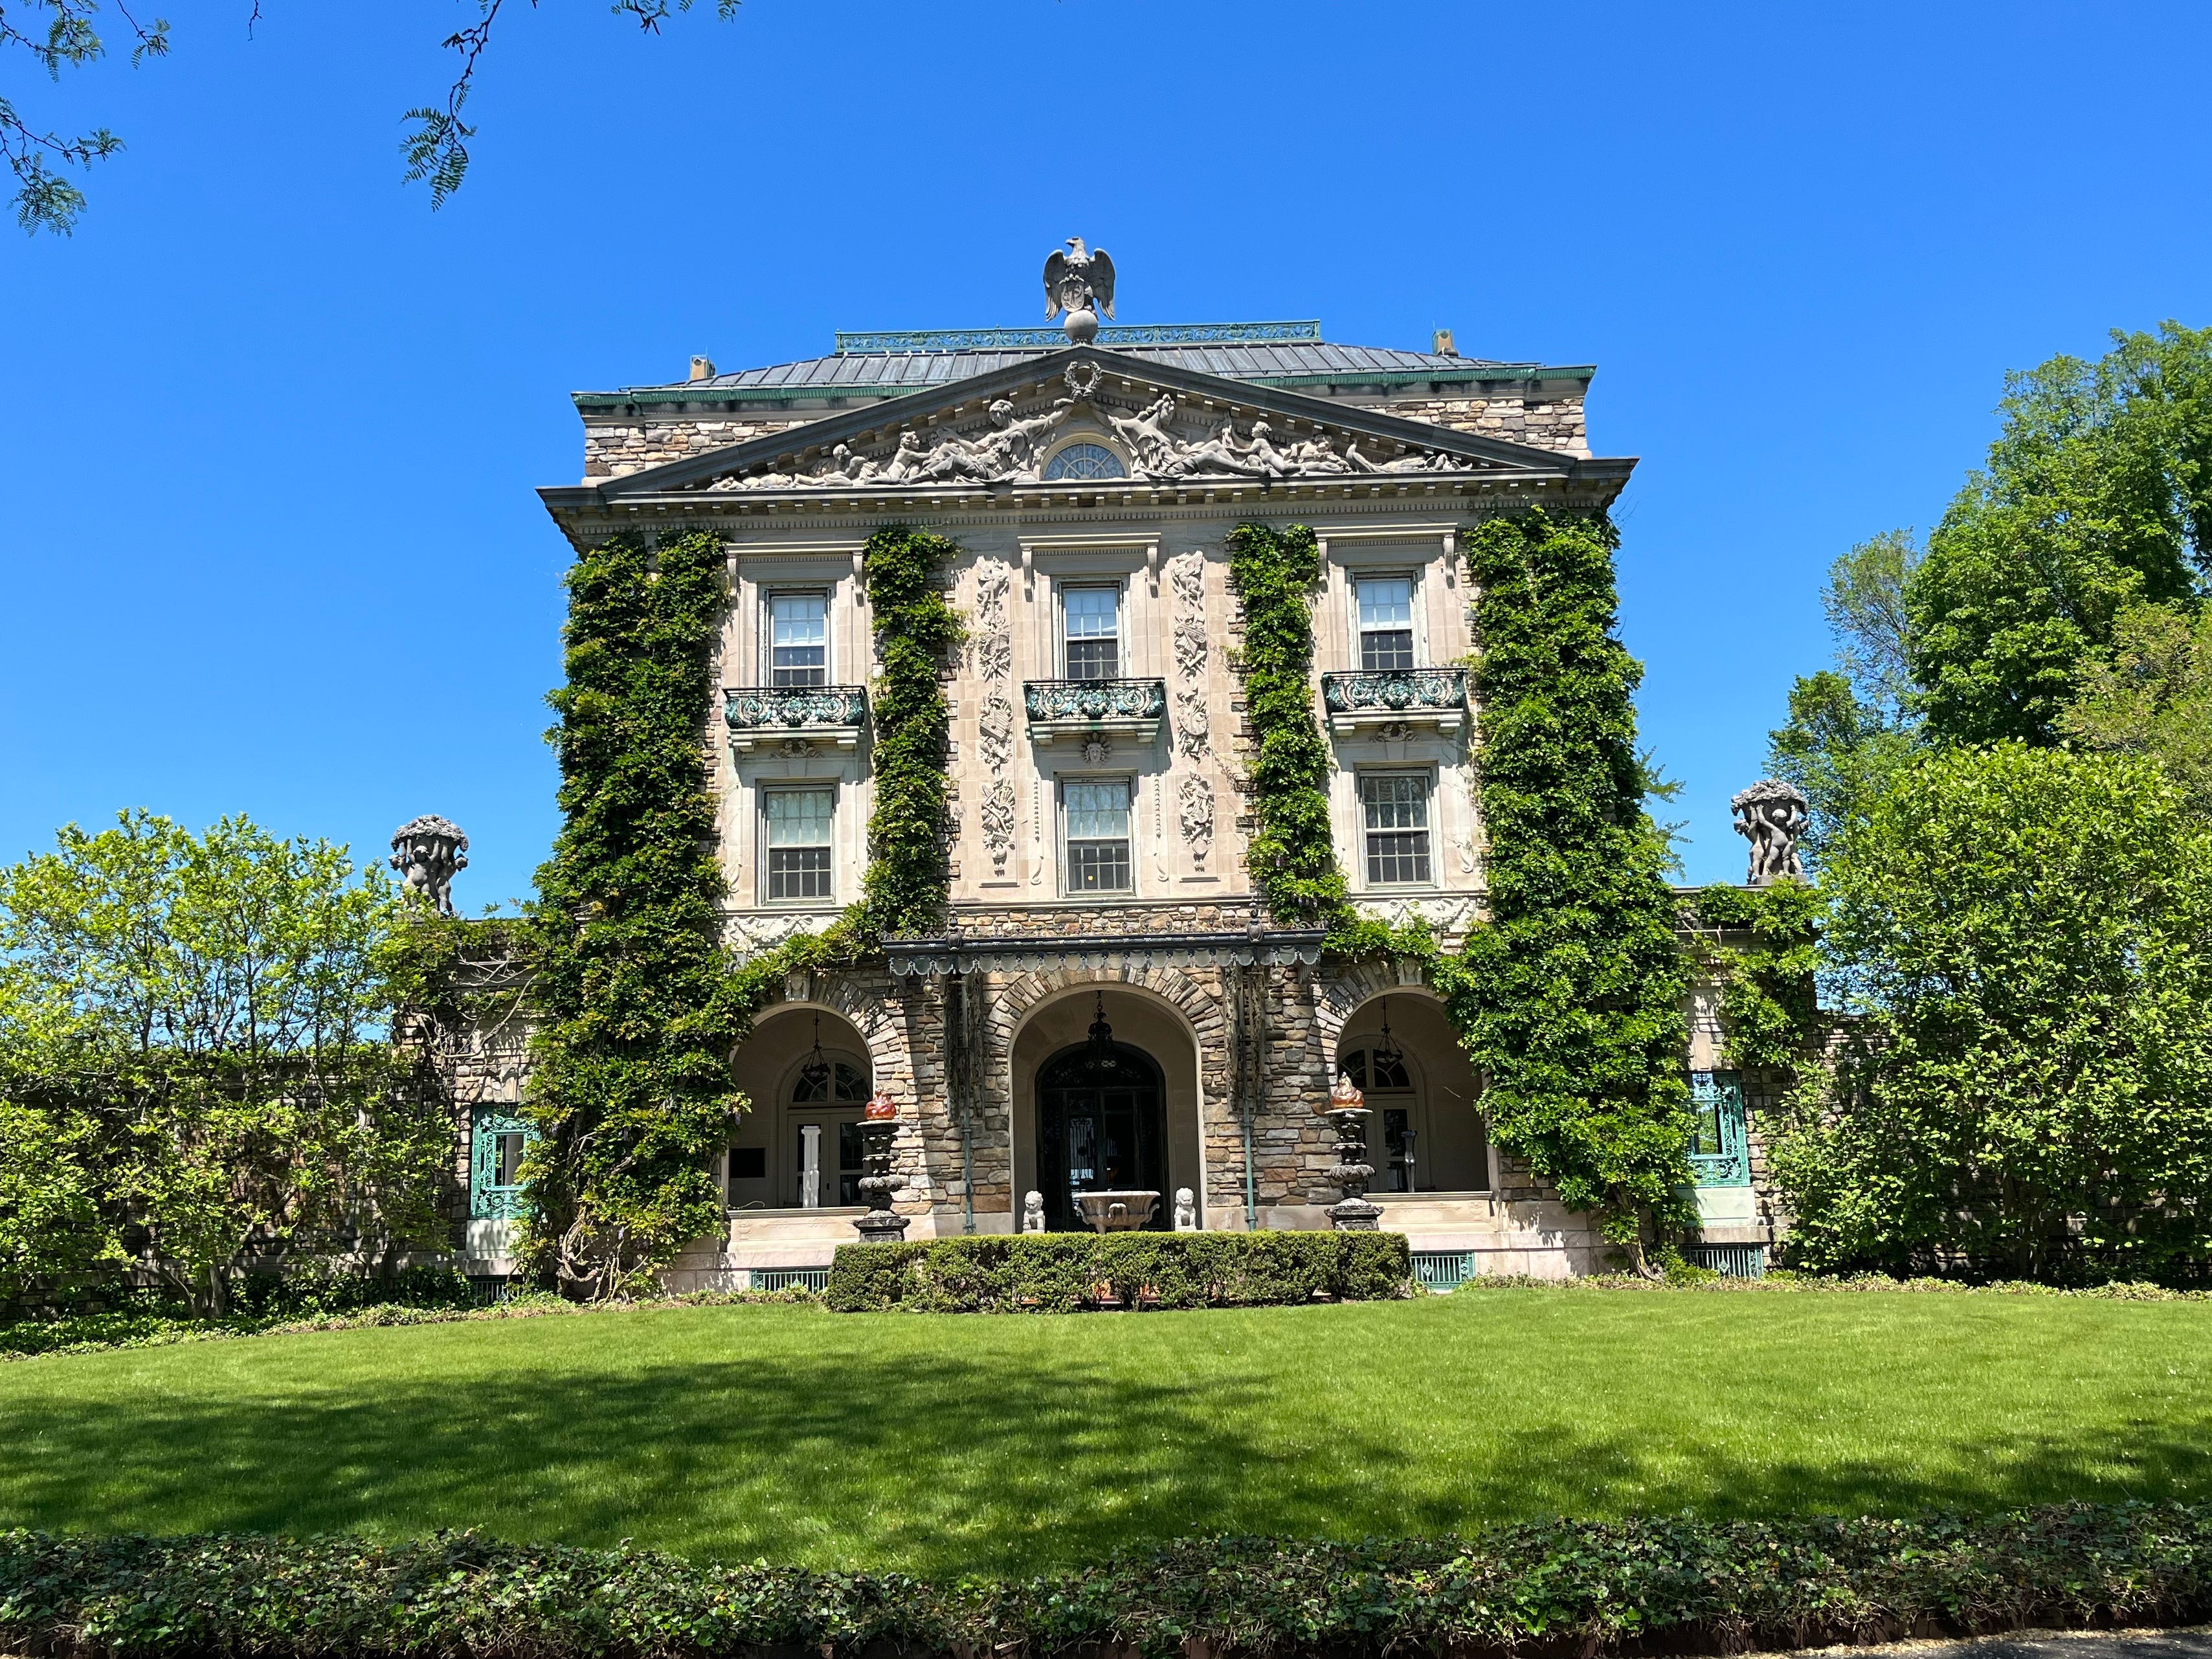 See inside Kykuit, a 40-room mansion in New York that once belonged to the richest man in the world